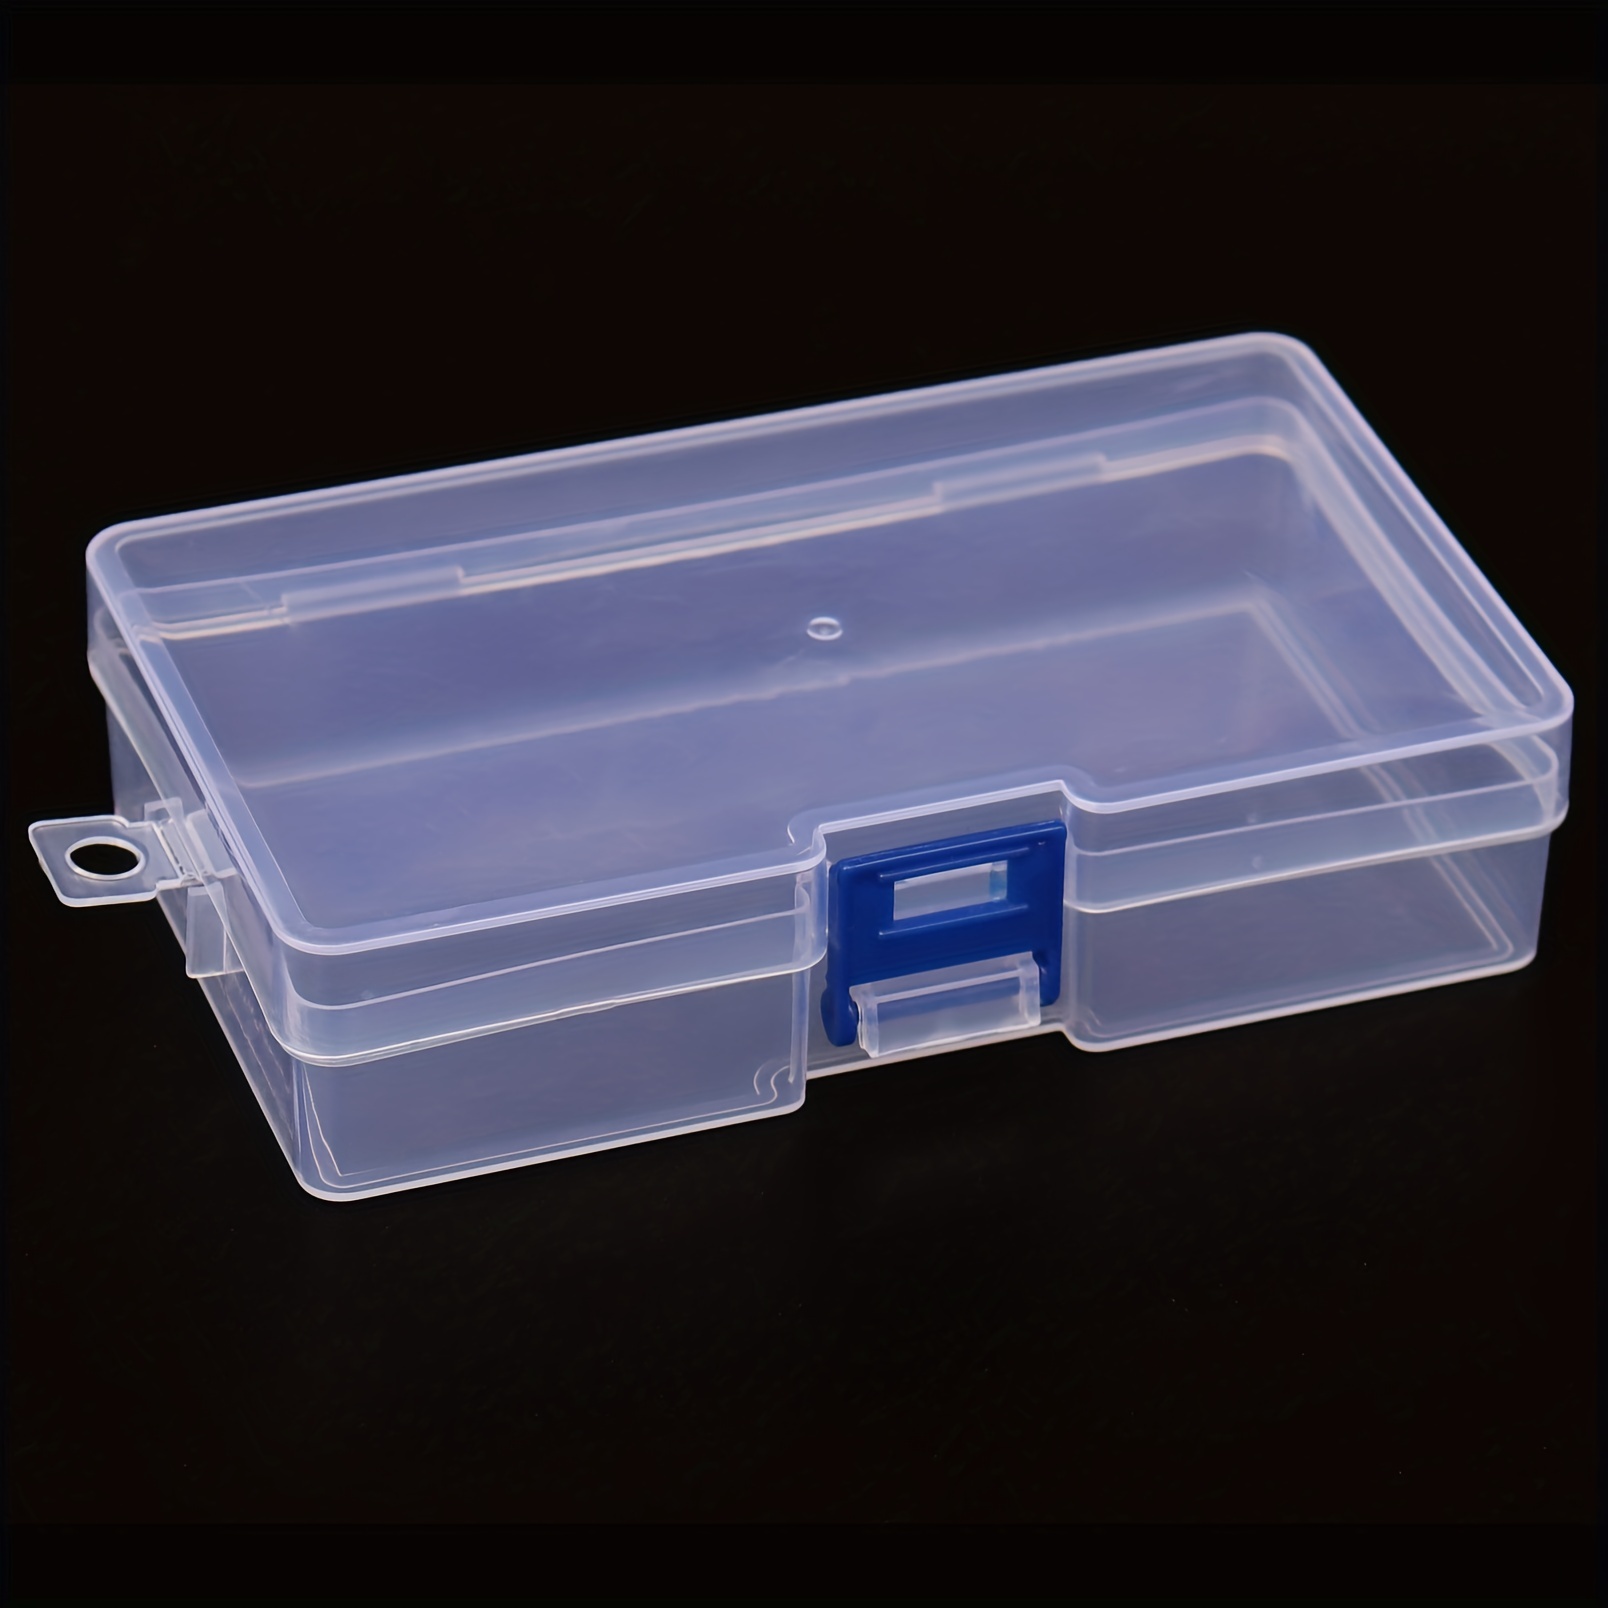 20 Small Plastic Boxes 2.95 in X 2.95 in X 1.02 in craft Organizer